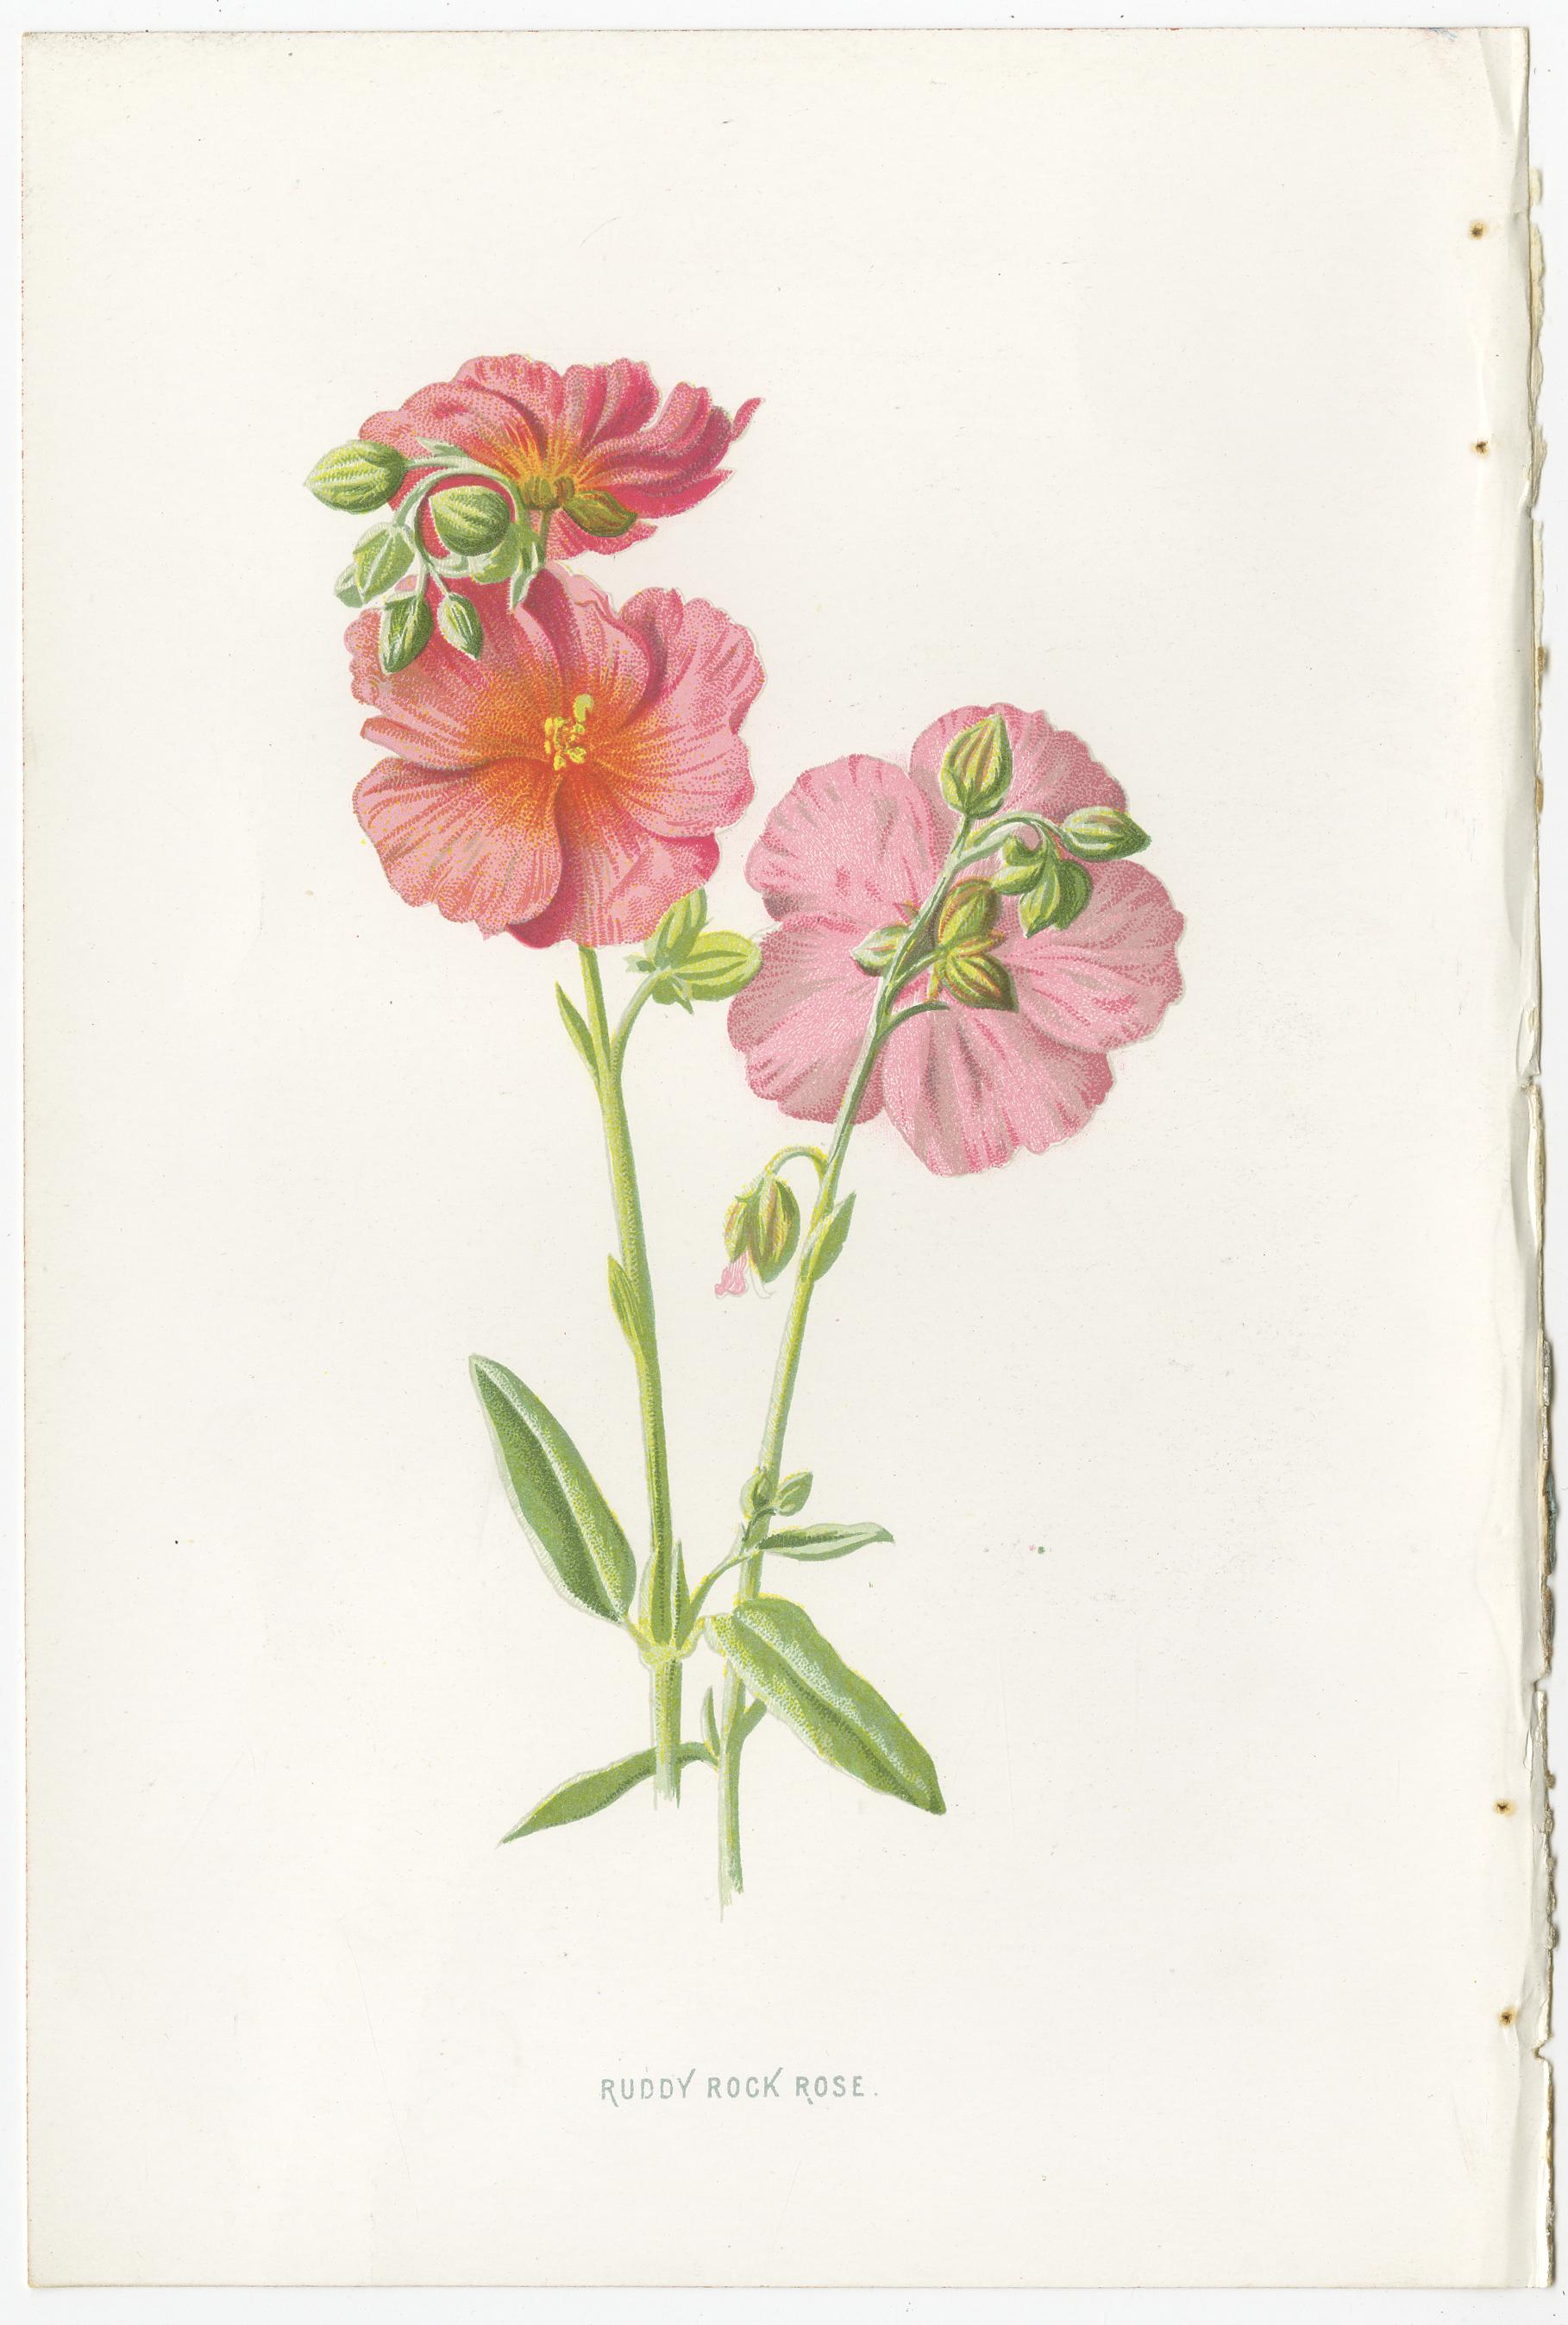 Set of three antique chromolithographs titled 'Ruddy Rock Rose, Salvia, Pulmonaria'. These prints originate from 'Familiar Garden Flowers' by F. Edward Hulme & Shirley Hibberd. Published in circa 1880.